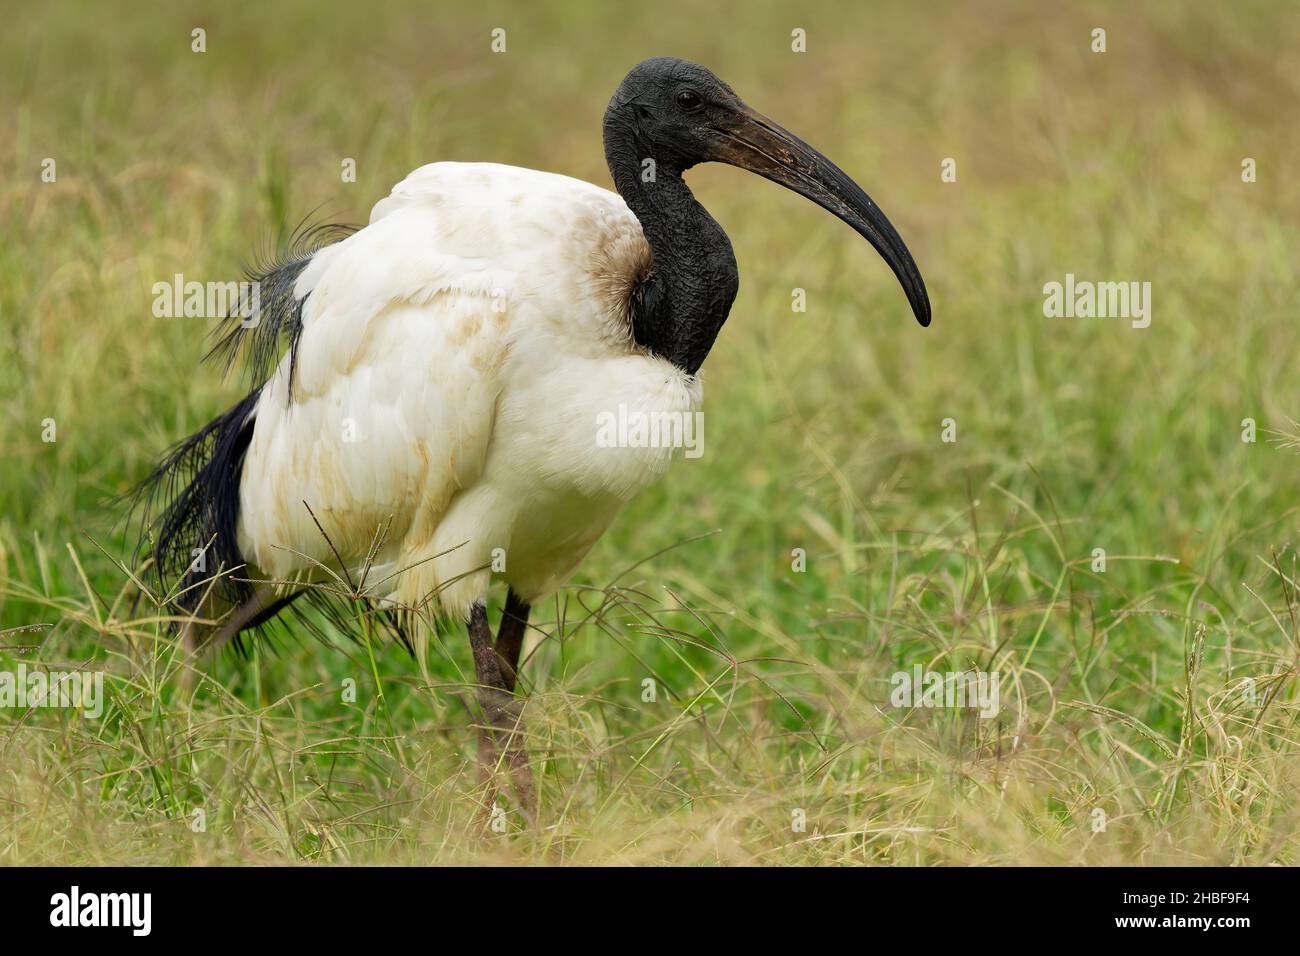 African sacred ibis - Threskiornis aethiopicus wading black and white bird of Threskiornithidae, native to Africa and the Middle East, role in the rel Stock Photo